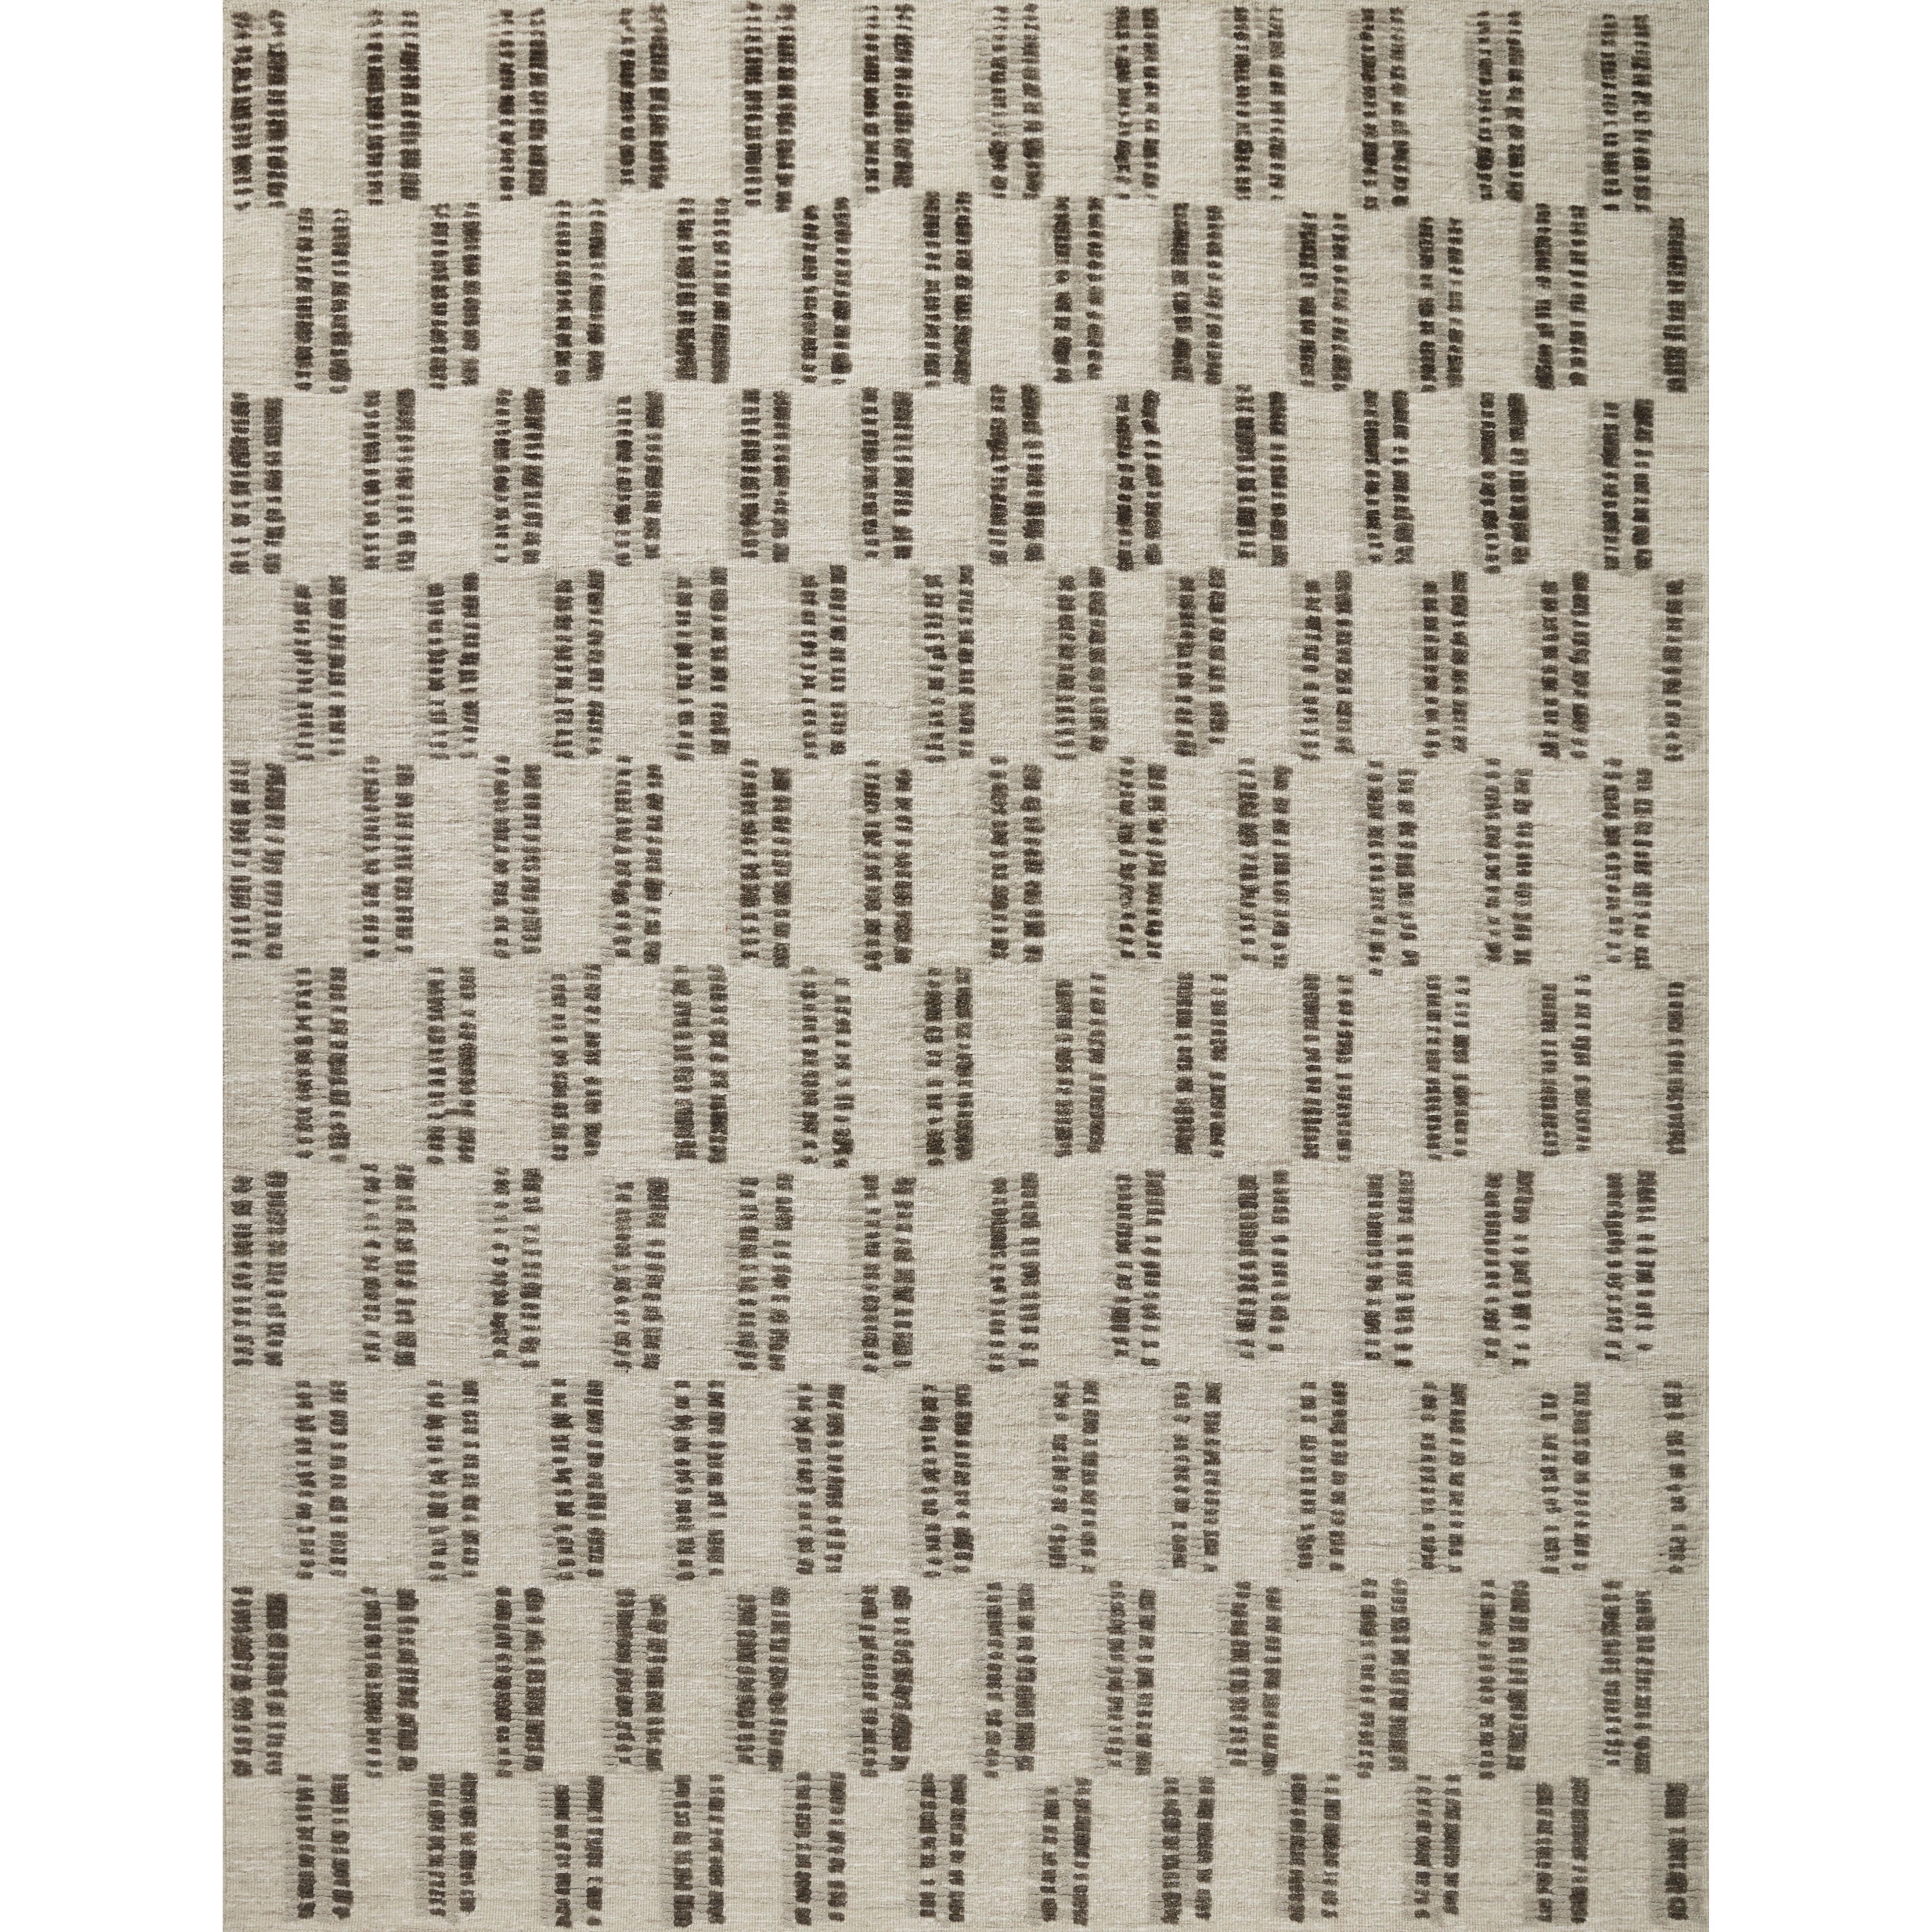 The Carrier & Company x Loloi Harrison Beige / Charcoal Rug is a playful selection of high/low pile, where the patterns are expressed through the weaves. Linear patterns help create order and clarity in a room, and the repetition in the patterns creates a pleasant energy.